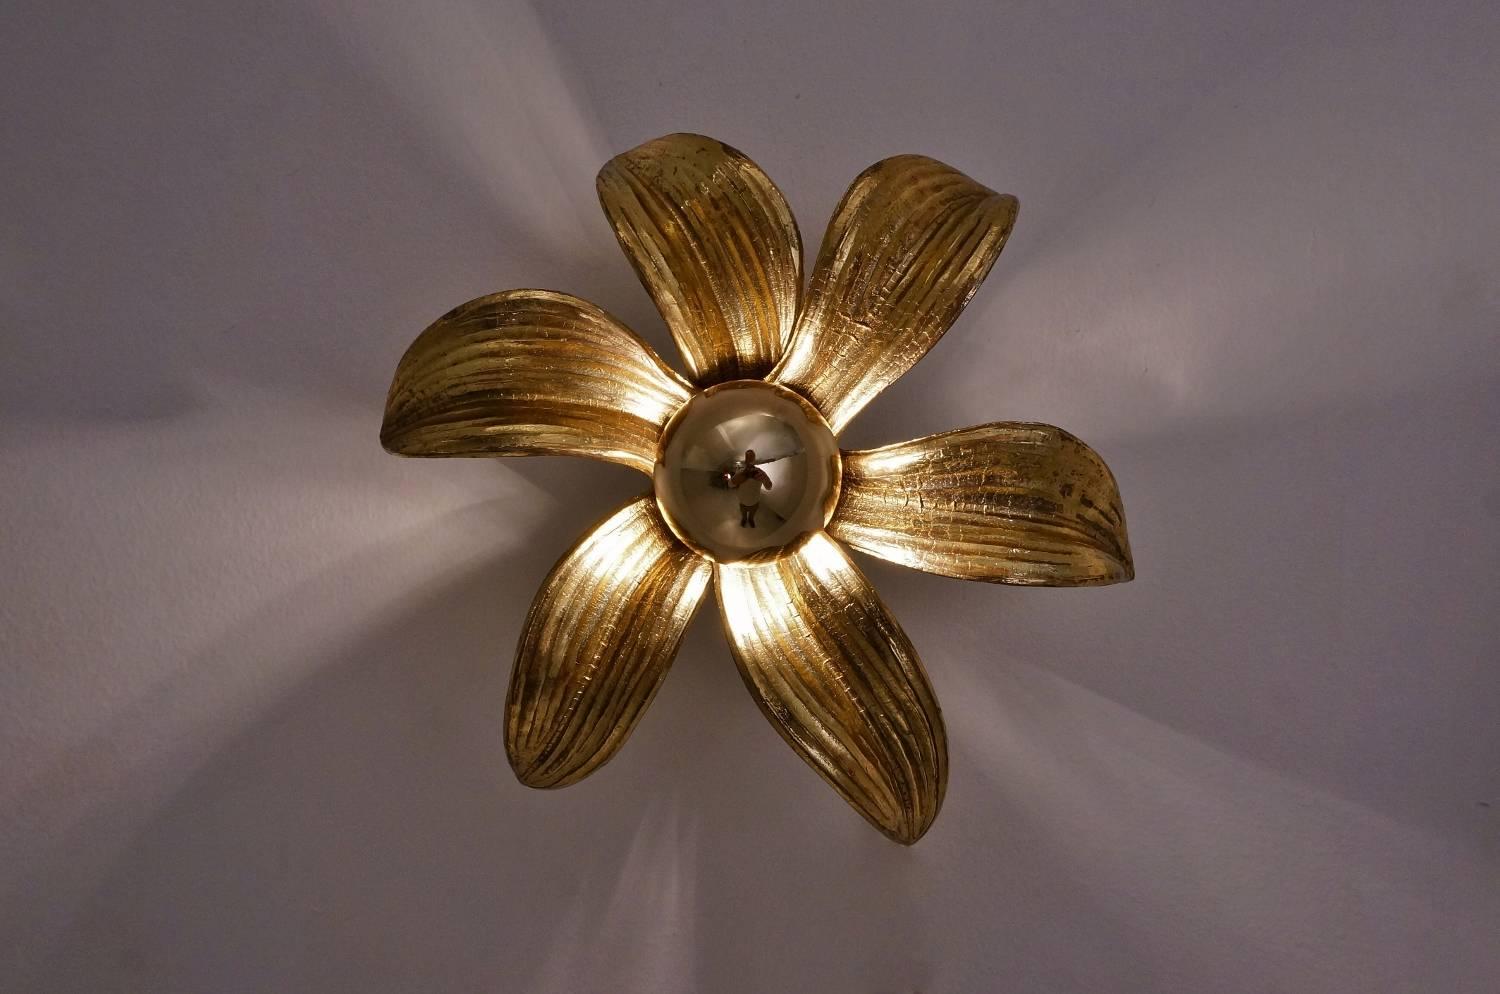 Willy Daro style brass flower wall light by the Belgian company 'Massive Lighting,' circa 1970s.

Thoroughly cleaned respecting the vintage patina. Newly rewired, earthed, in full working order & ready to install. Light bulb included.

This